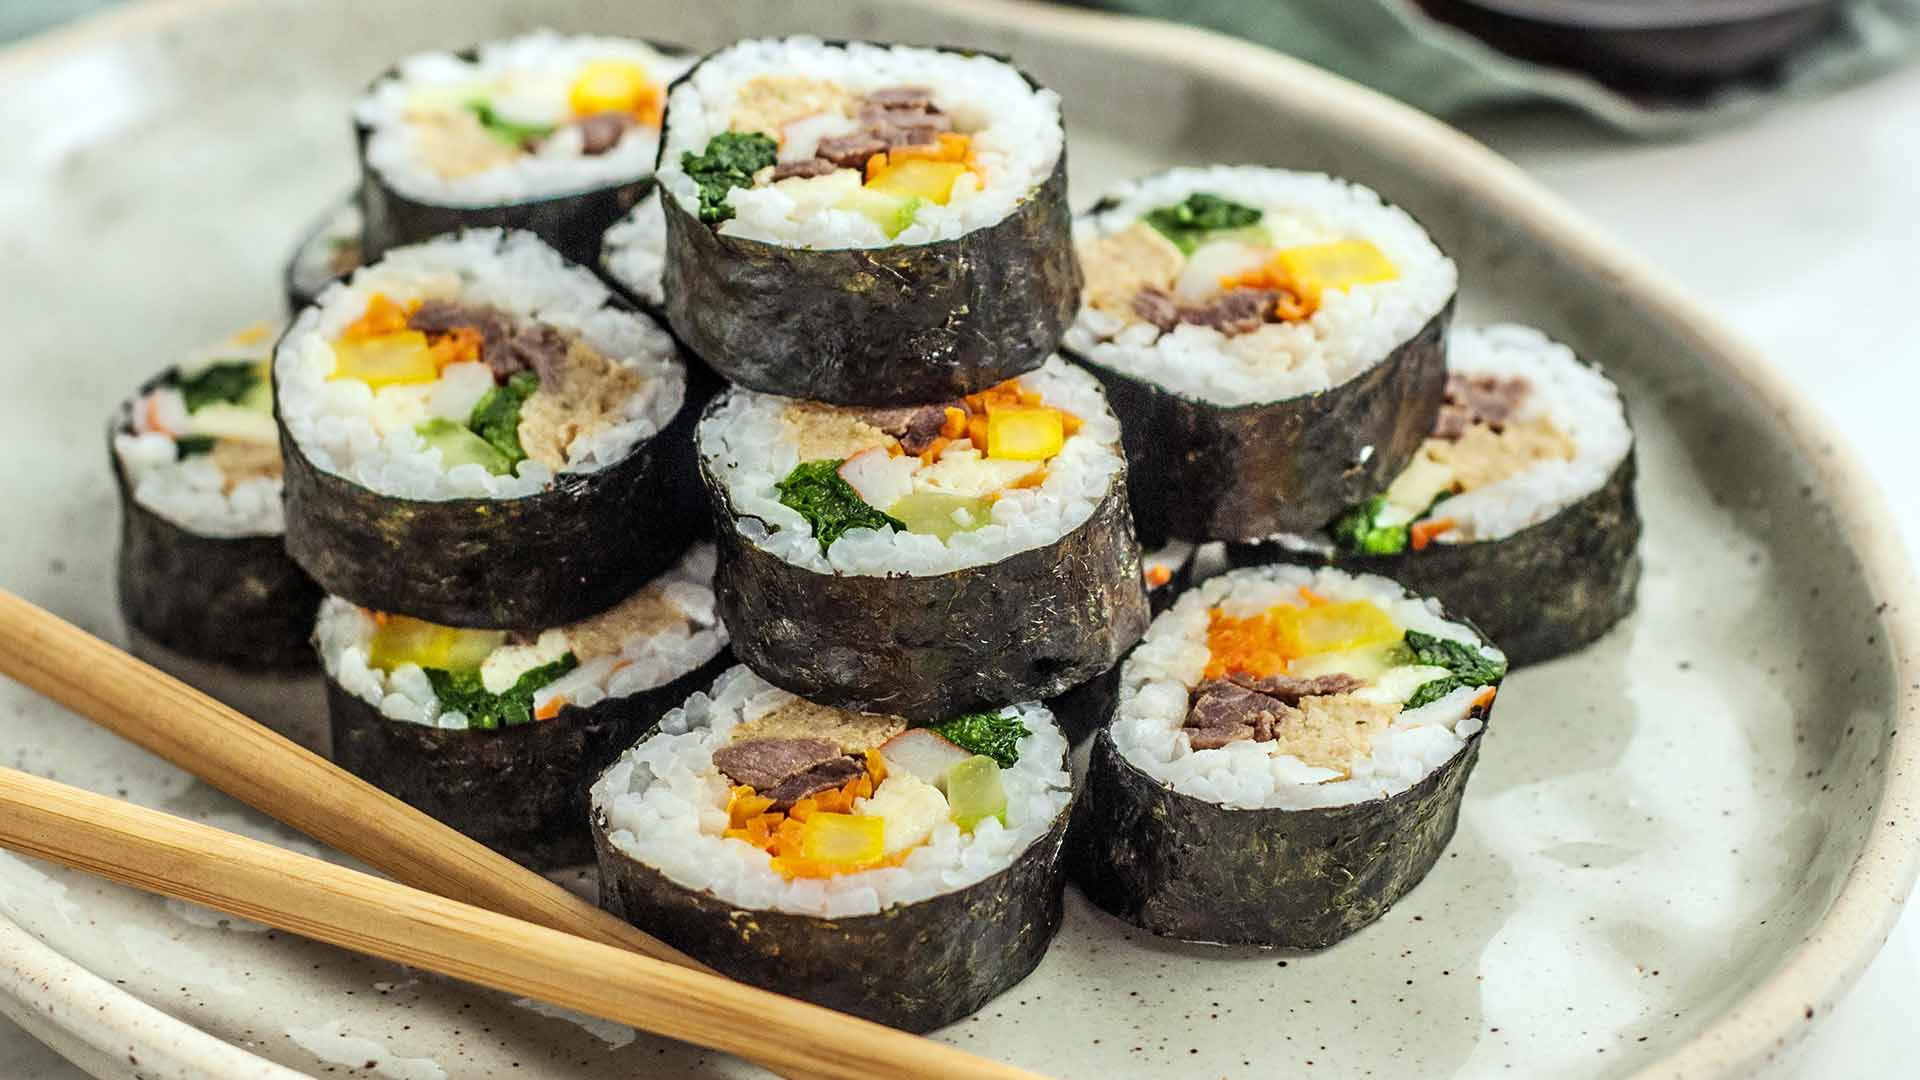 Are Hand Rolls Better Than Sushi Rolls? - It's Time To Think About Words